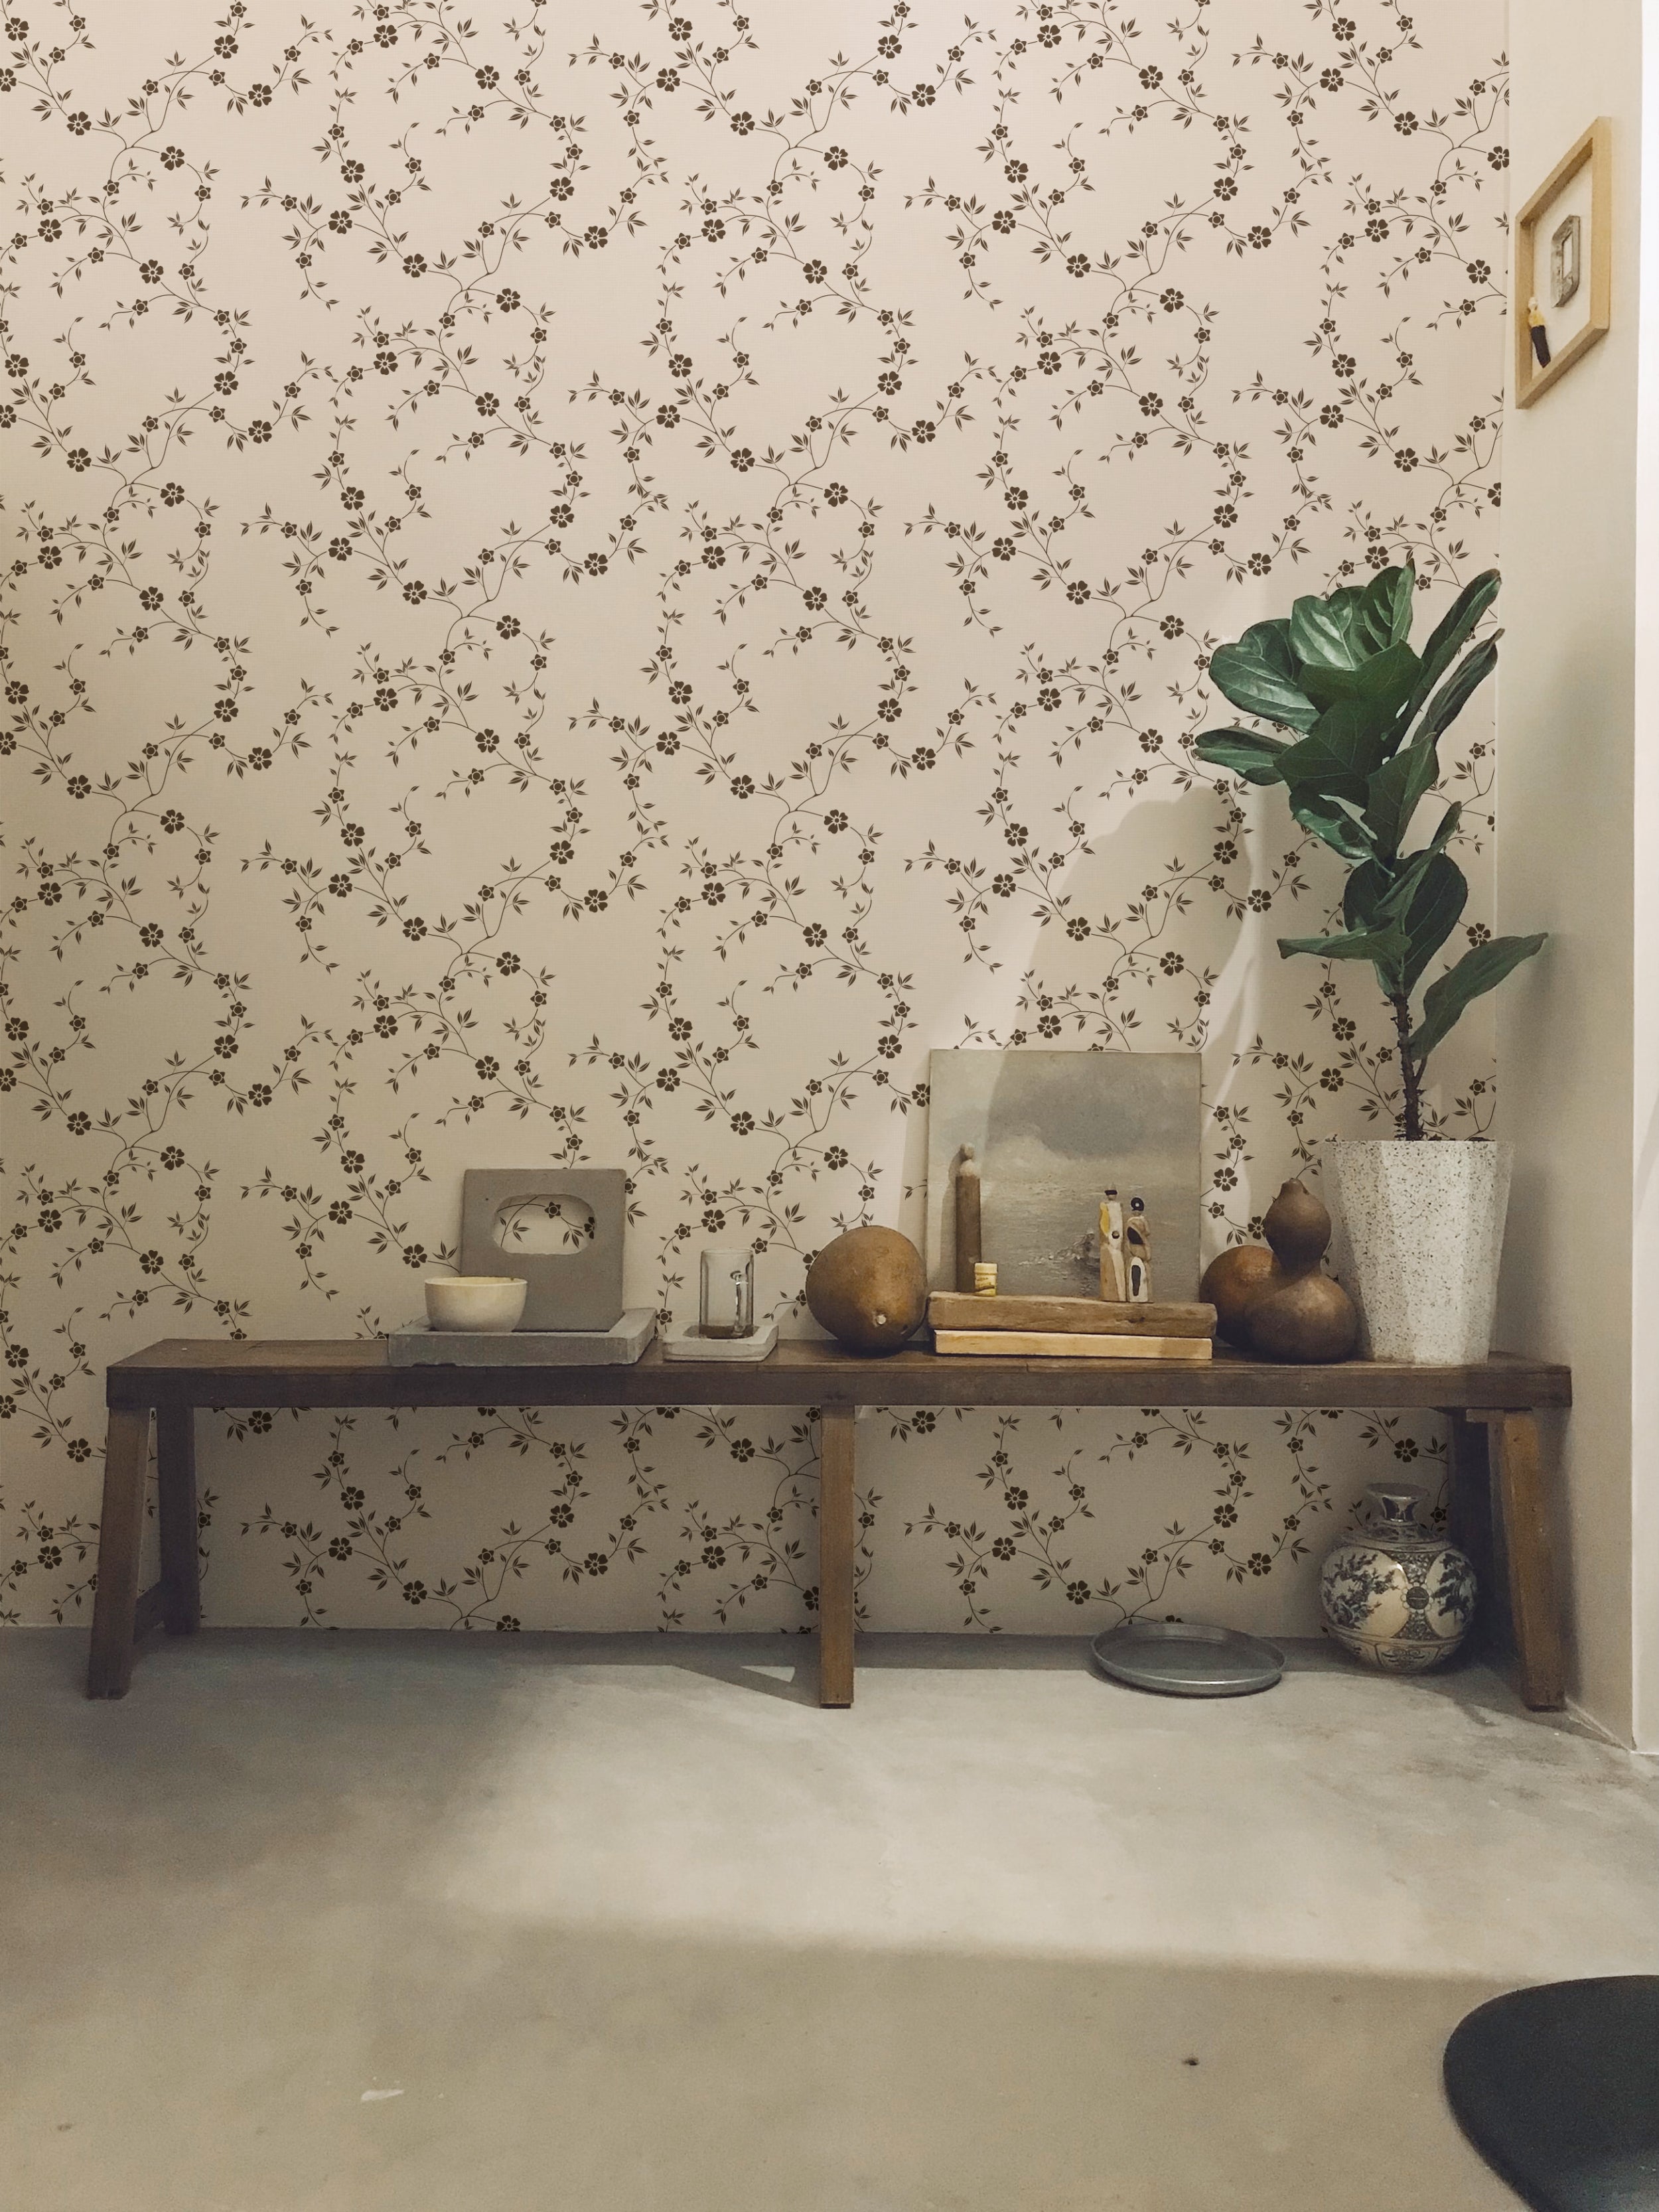 A sophisticated interior featuring Charming Floral Wallpaper in Deep Brown, showcasing an intricate pattern of small flowers and leaves. The setting includes a rustic wooden bench with decorative items, creating a warm, inviting ambiance.